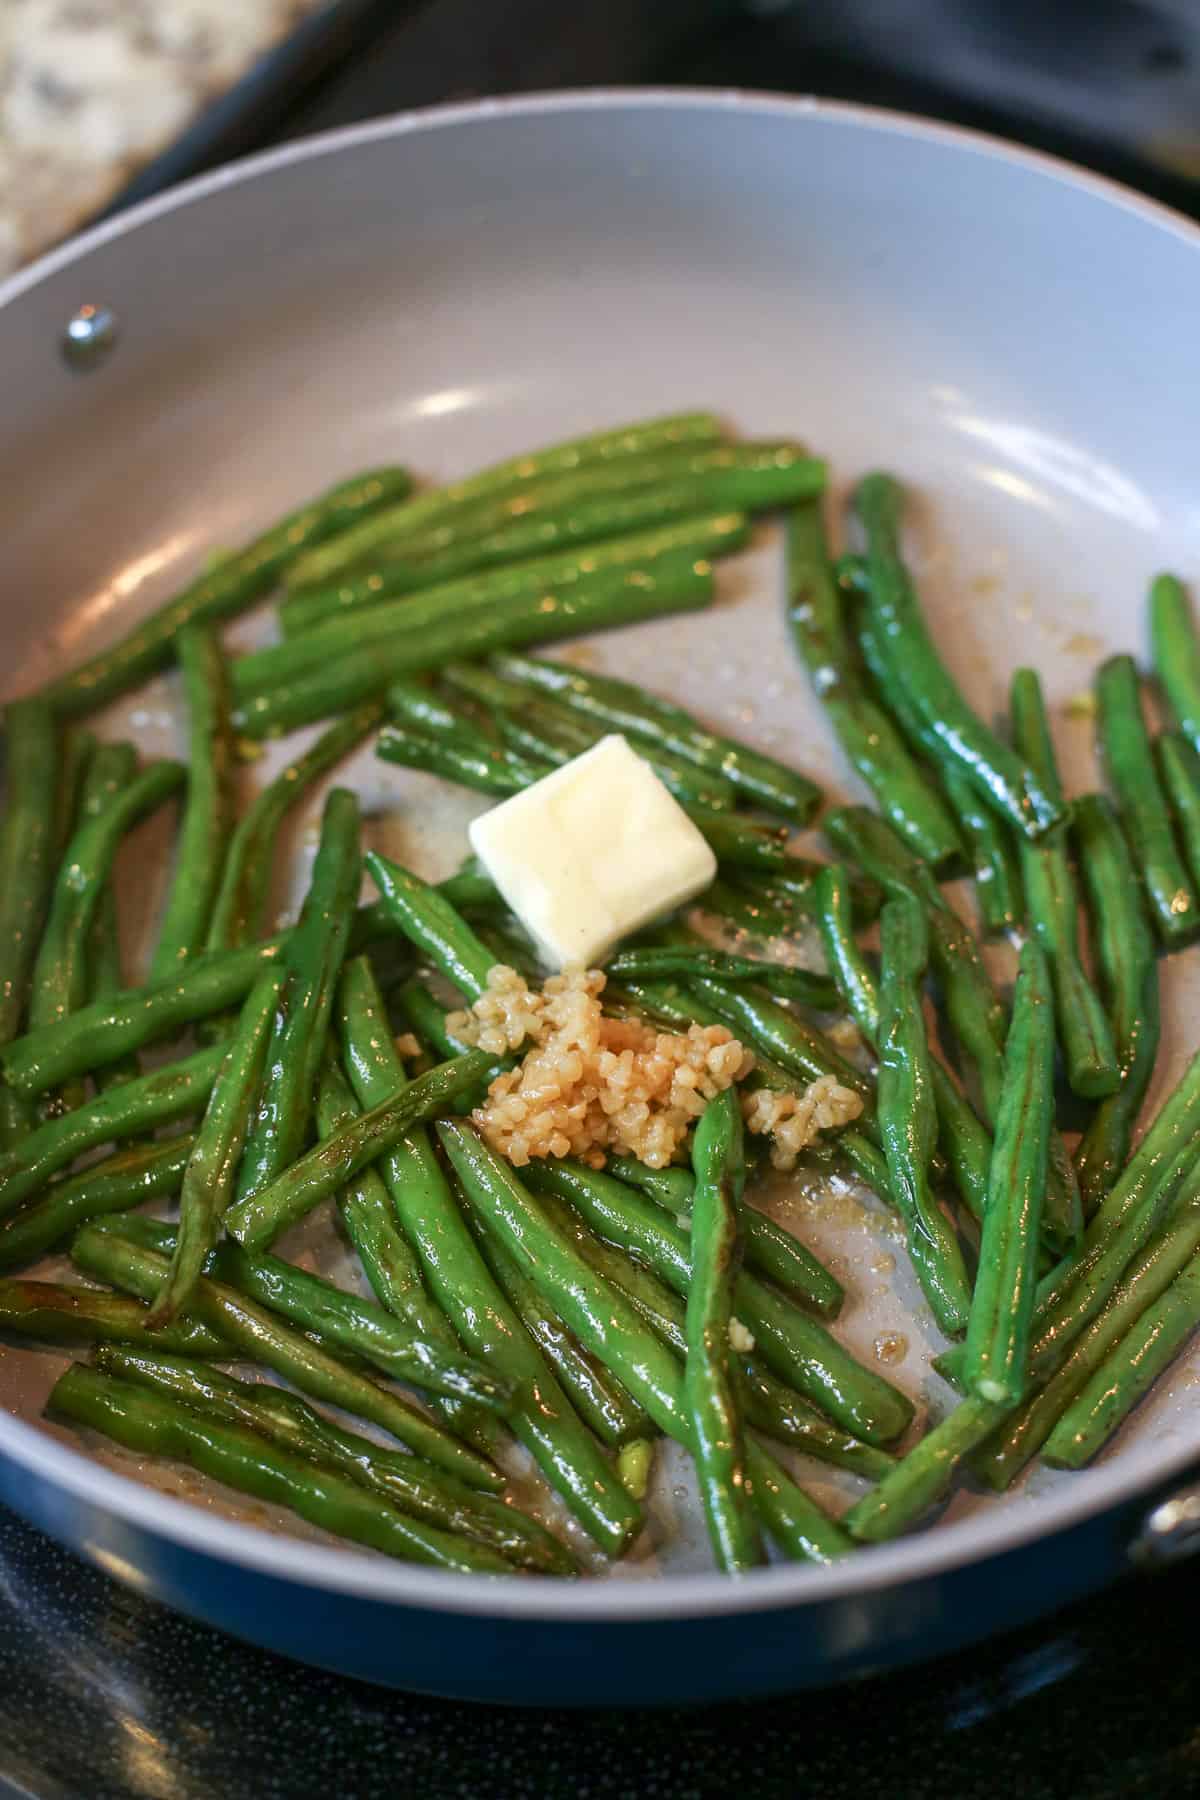 Butter and garlic added to sauteed green beans in ceramic pan.